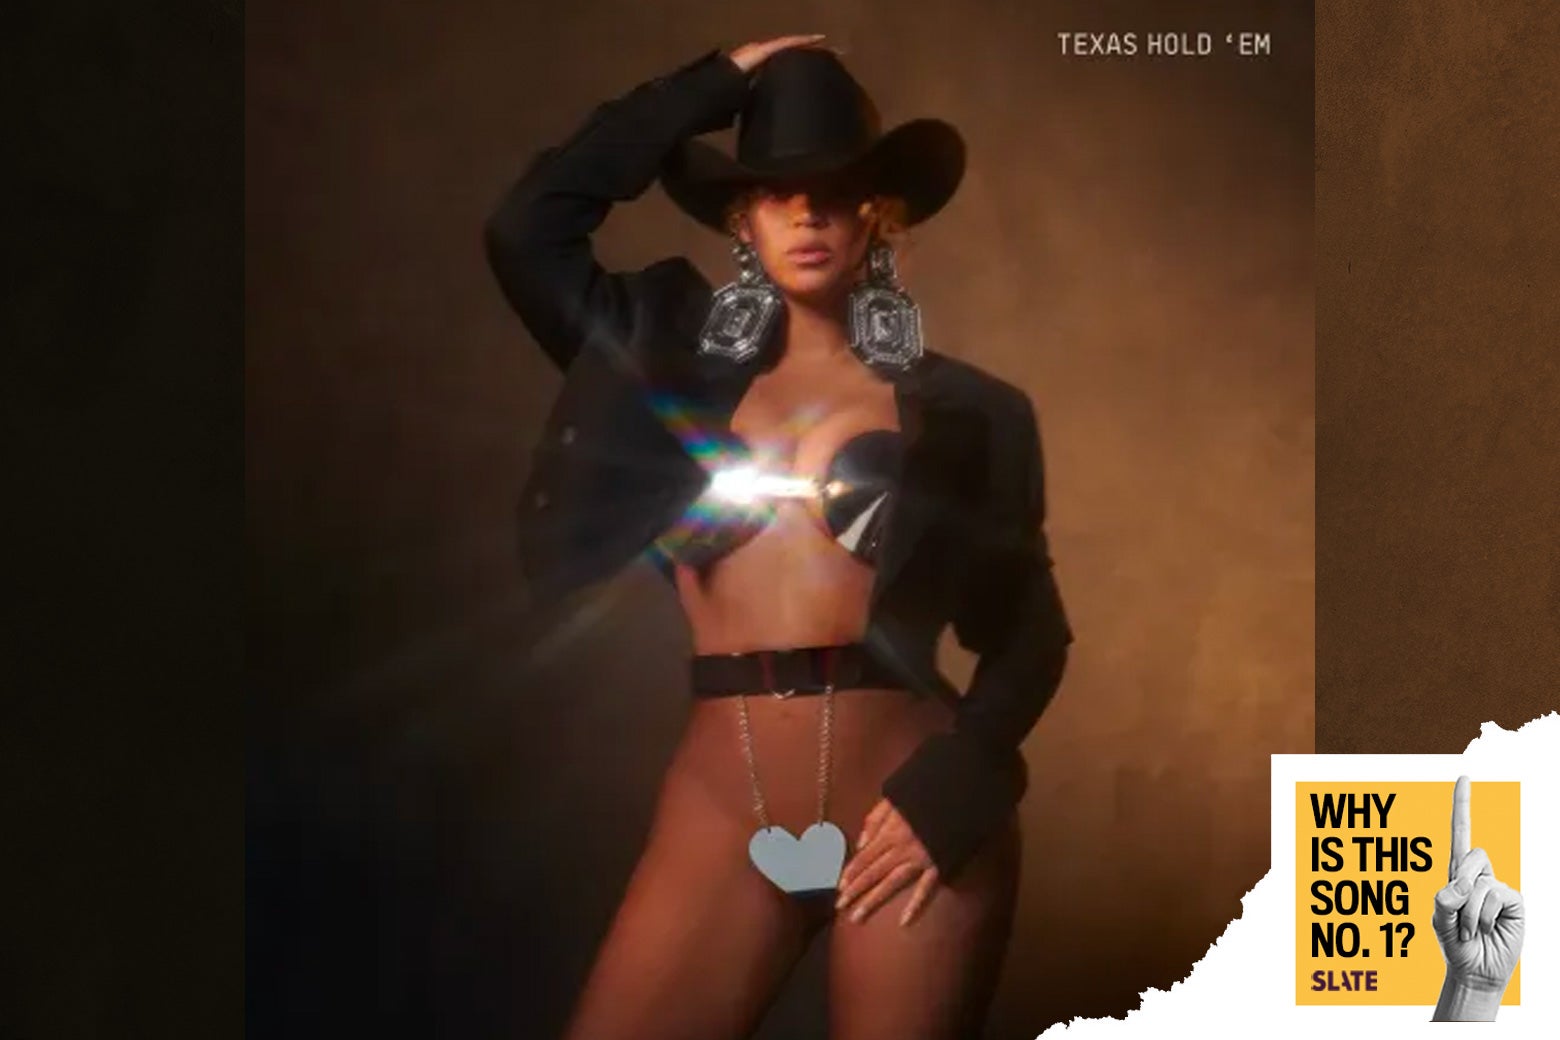 An illustration shows, at the center, the cover art for Beyoncé’s “Texas Hold ’Em,” which features the singer near naked in nothing but a black cowboy hat, an open riding jacket, and metal heart underwear. In the corner, a logo reads “Why Is This Song No. 1?”